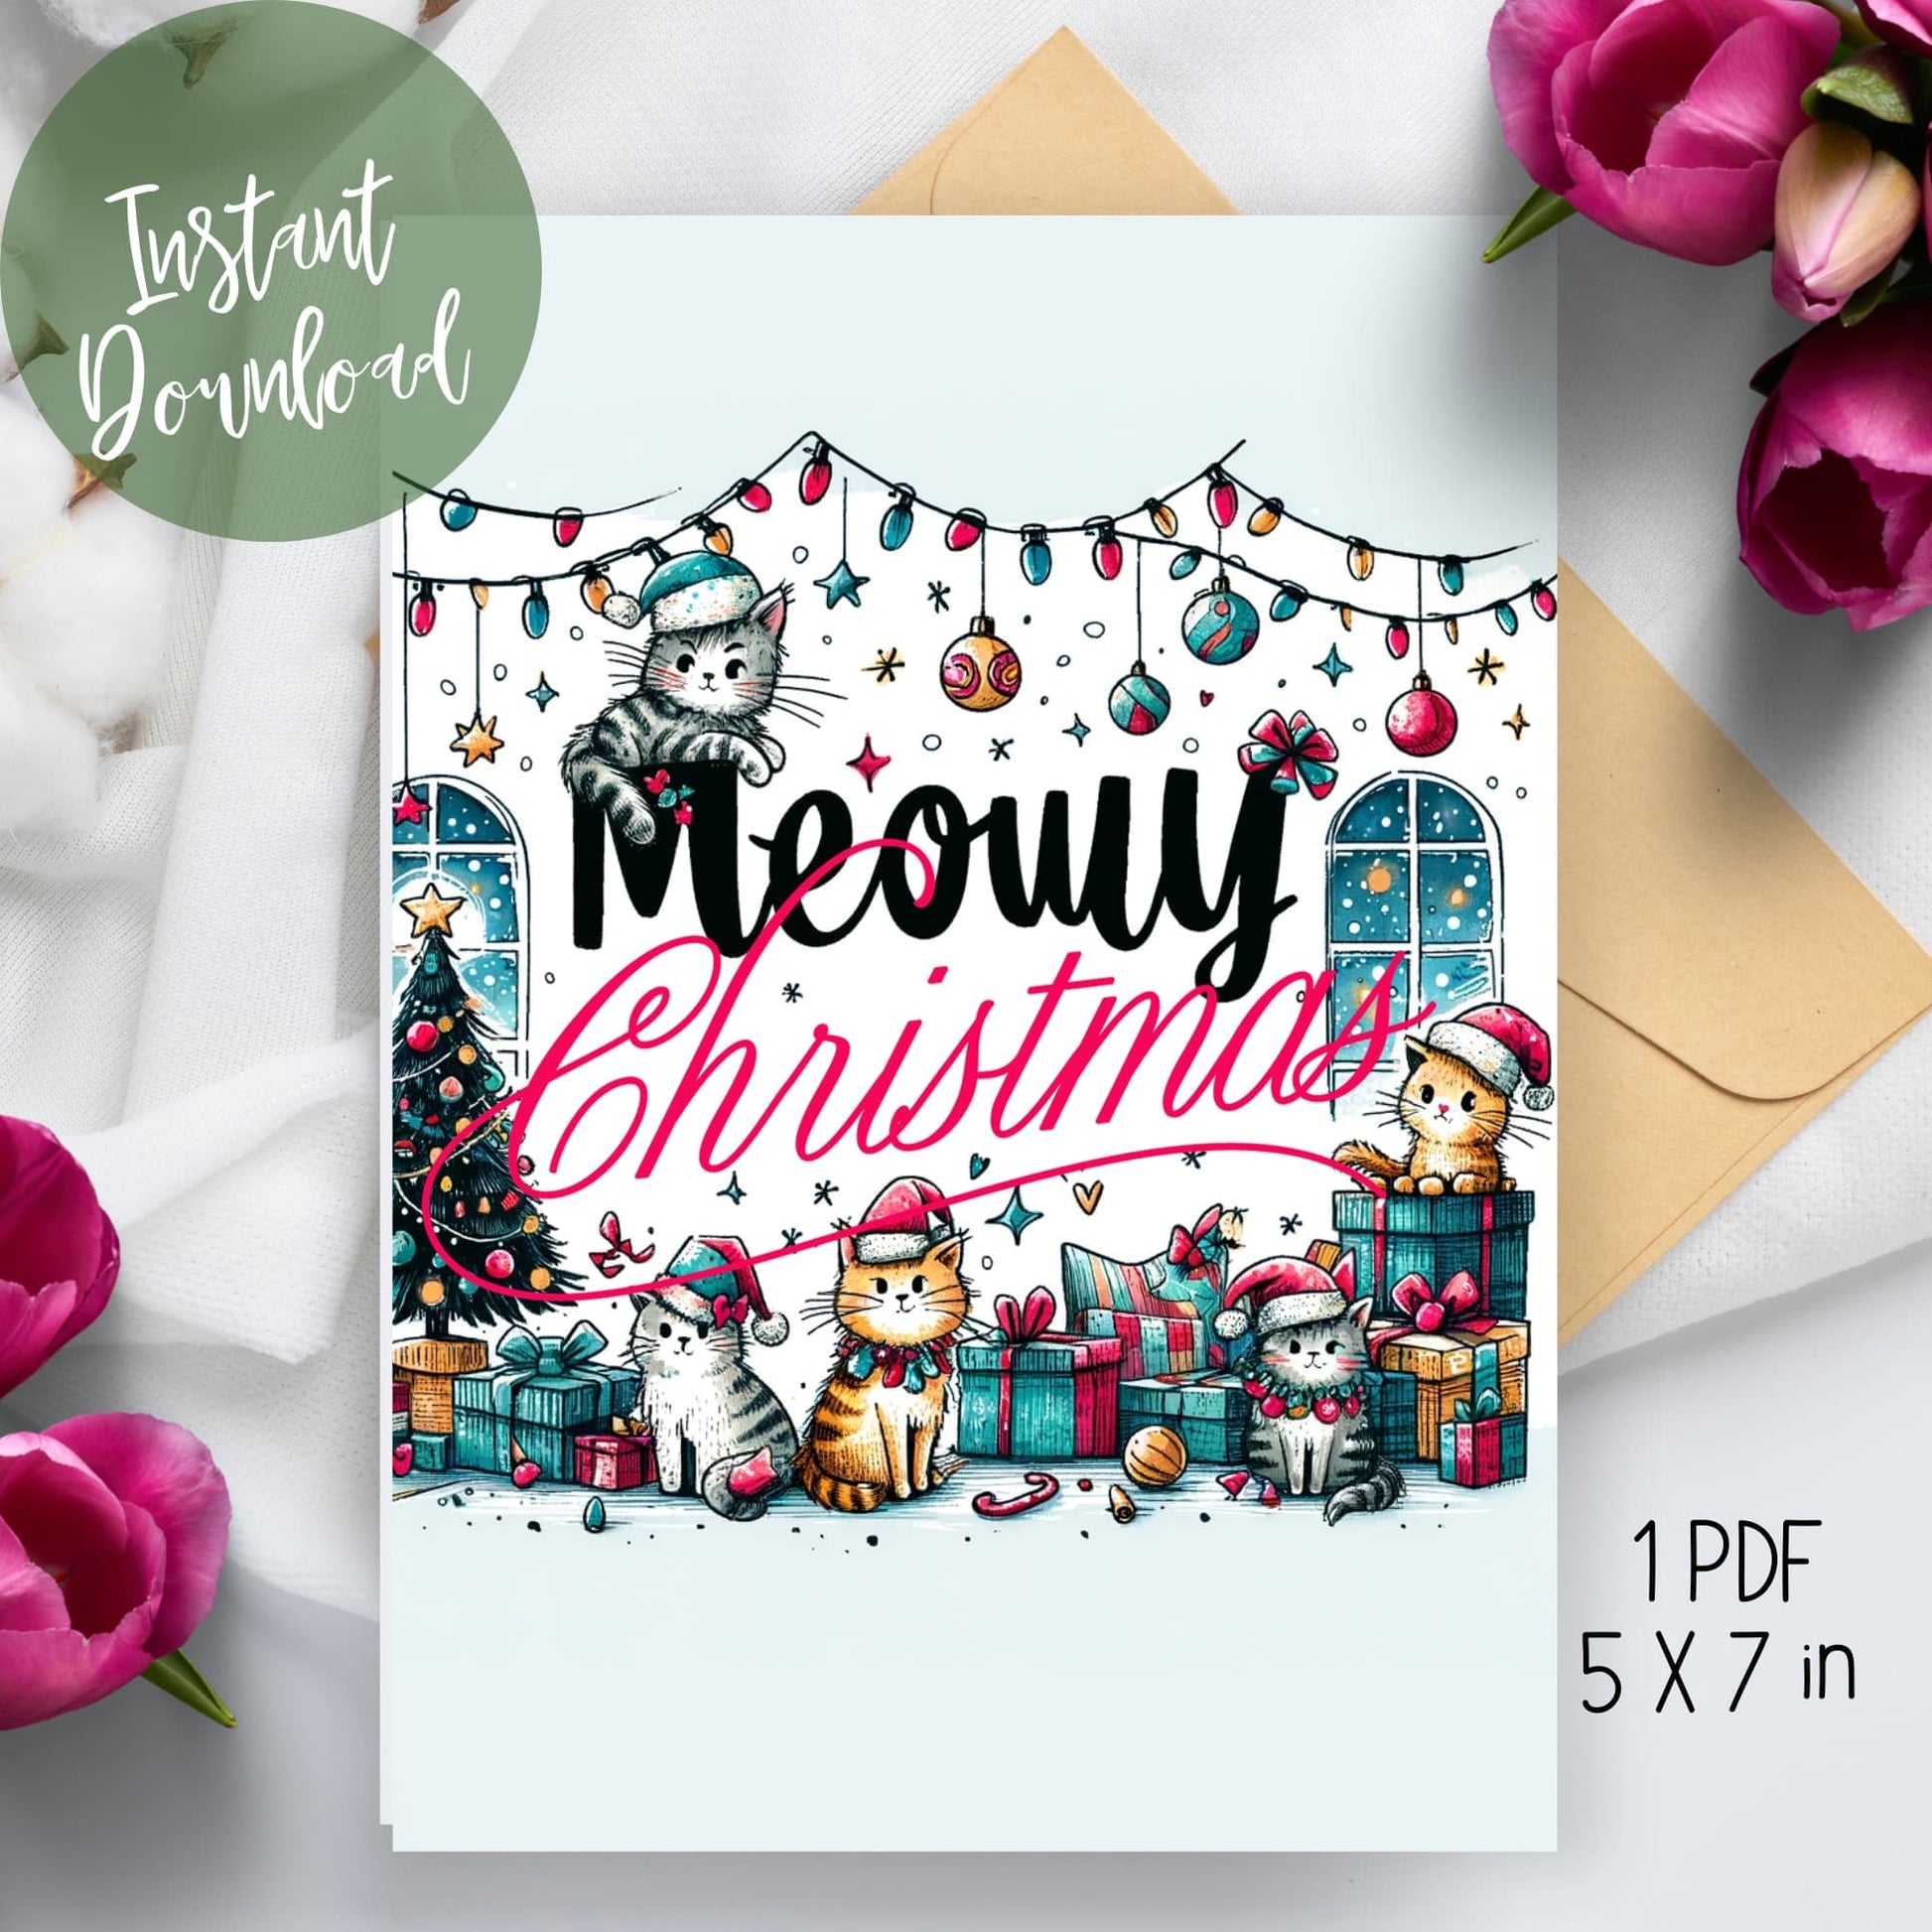 2023 Meowy Cats Christmas Greeting Card Template displayed on a table with an envelope and floral decoration, showcasing a cozy and festive feline theme for the holiday season.